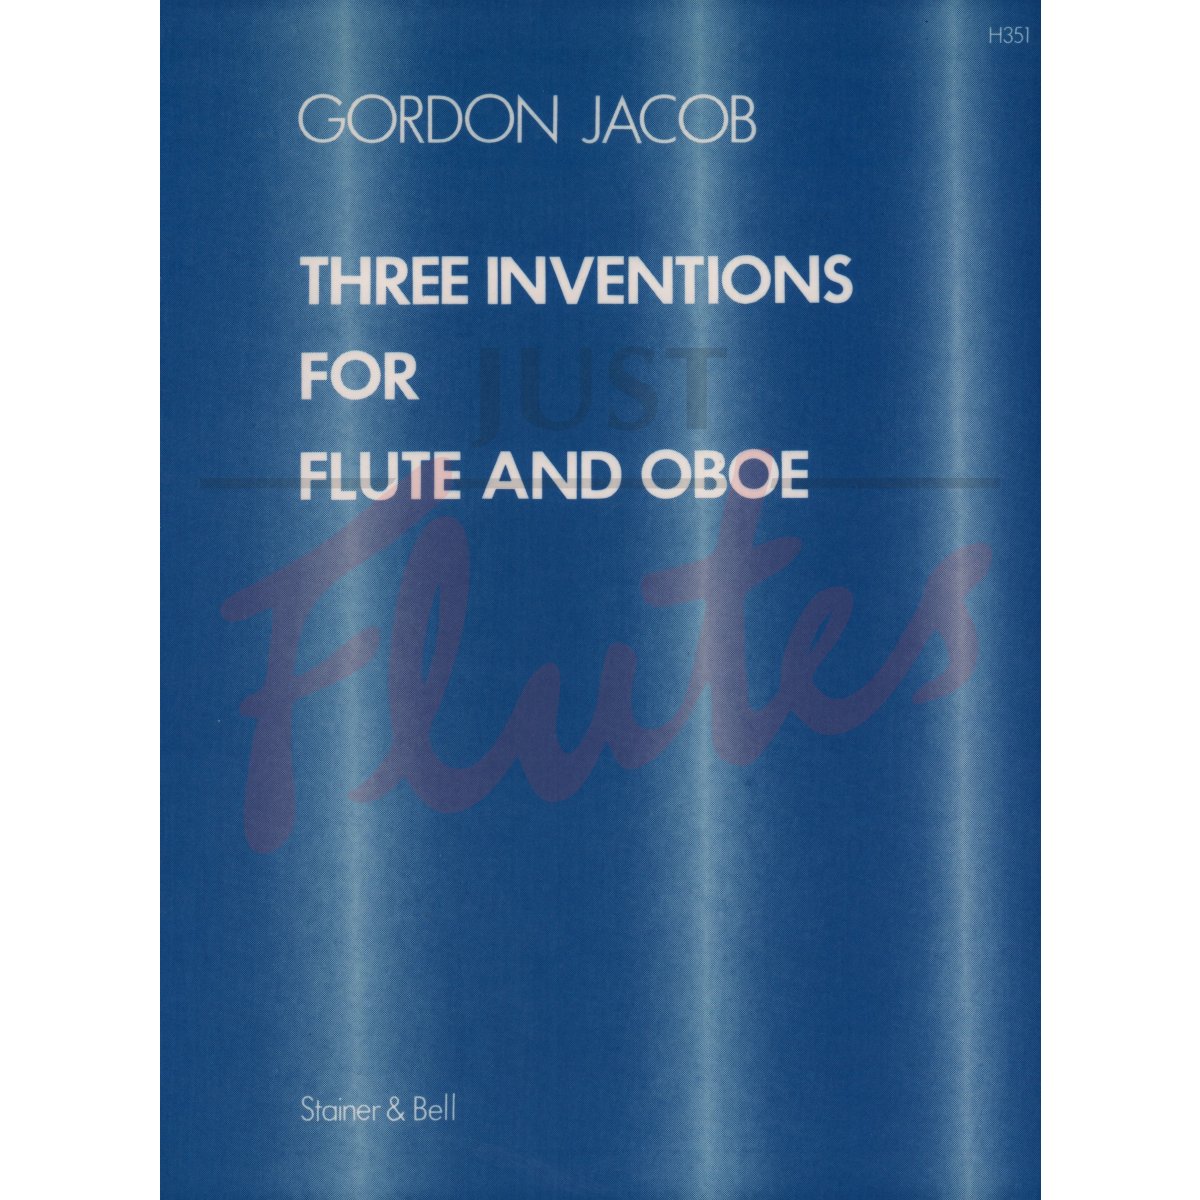 Three Inventions for Flute and Oboe